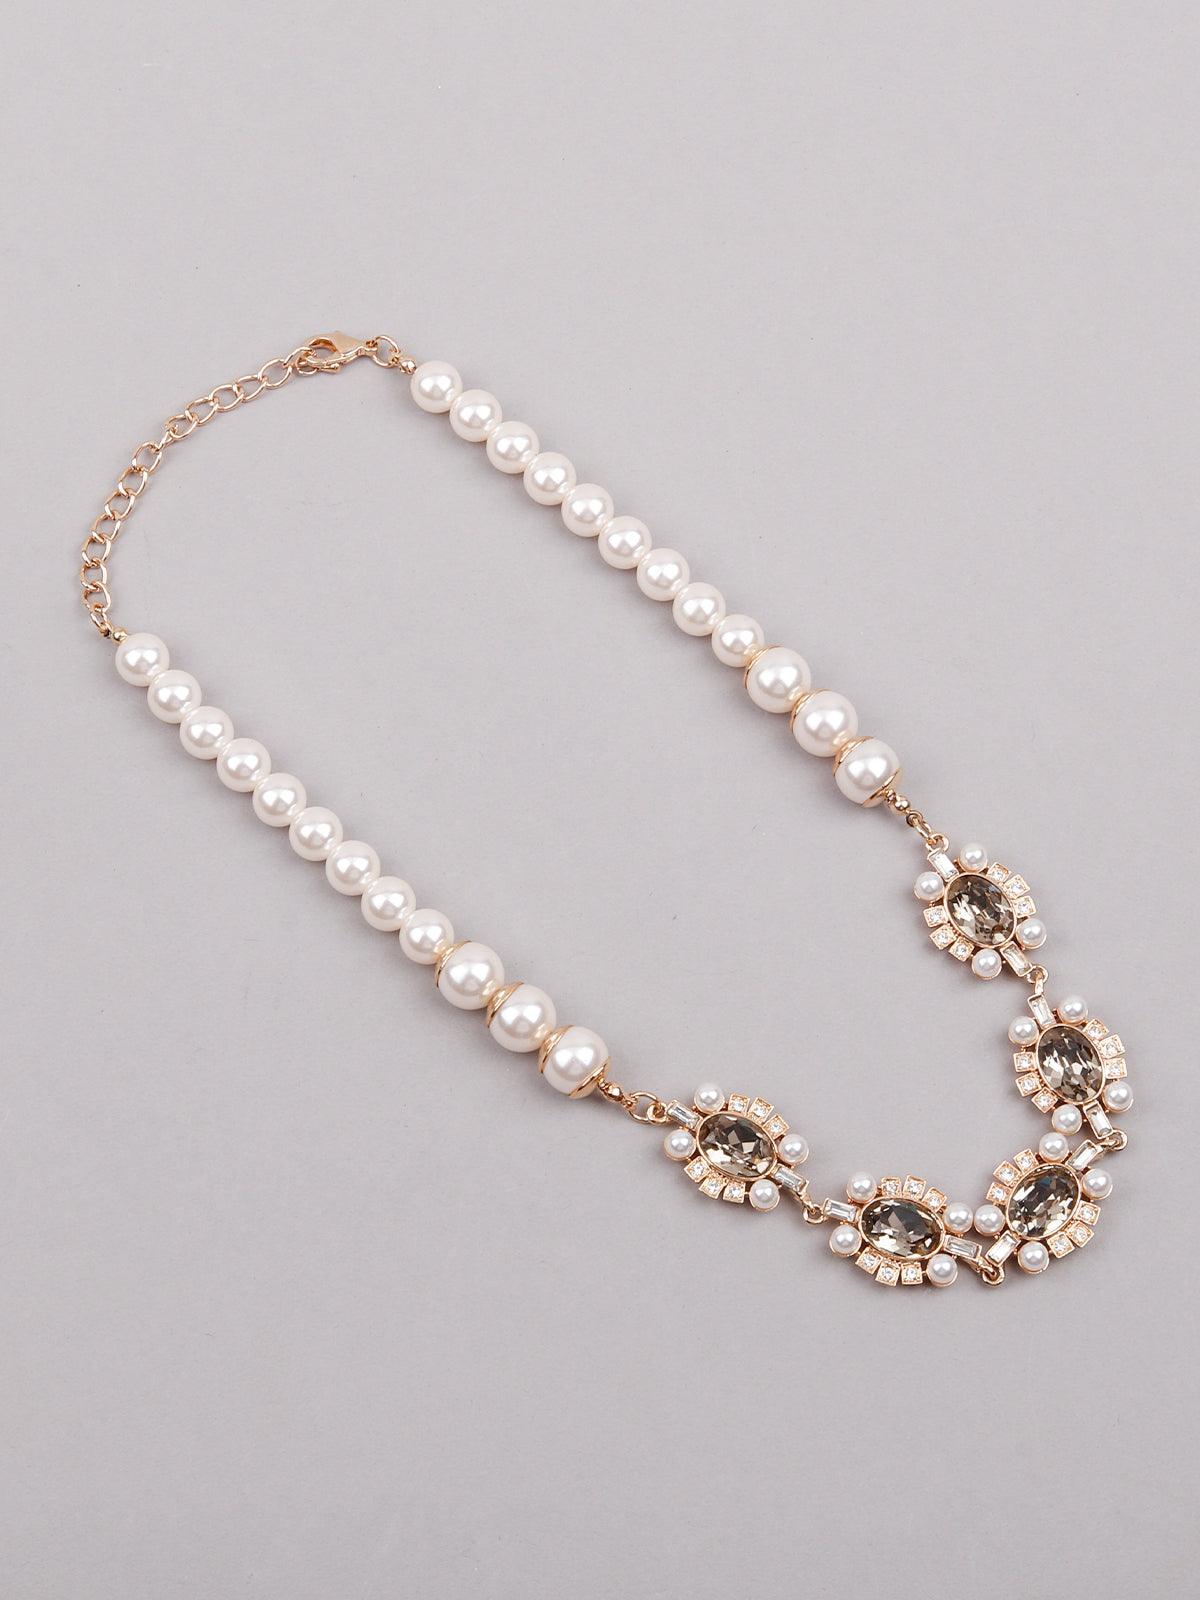 WHITE AND GREY NECKLACE - Odette